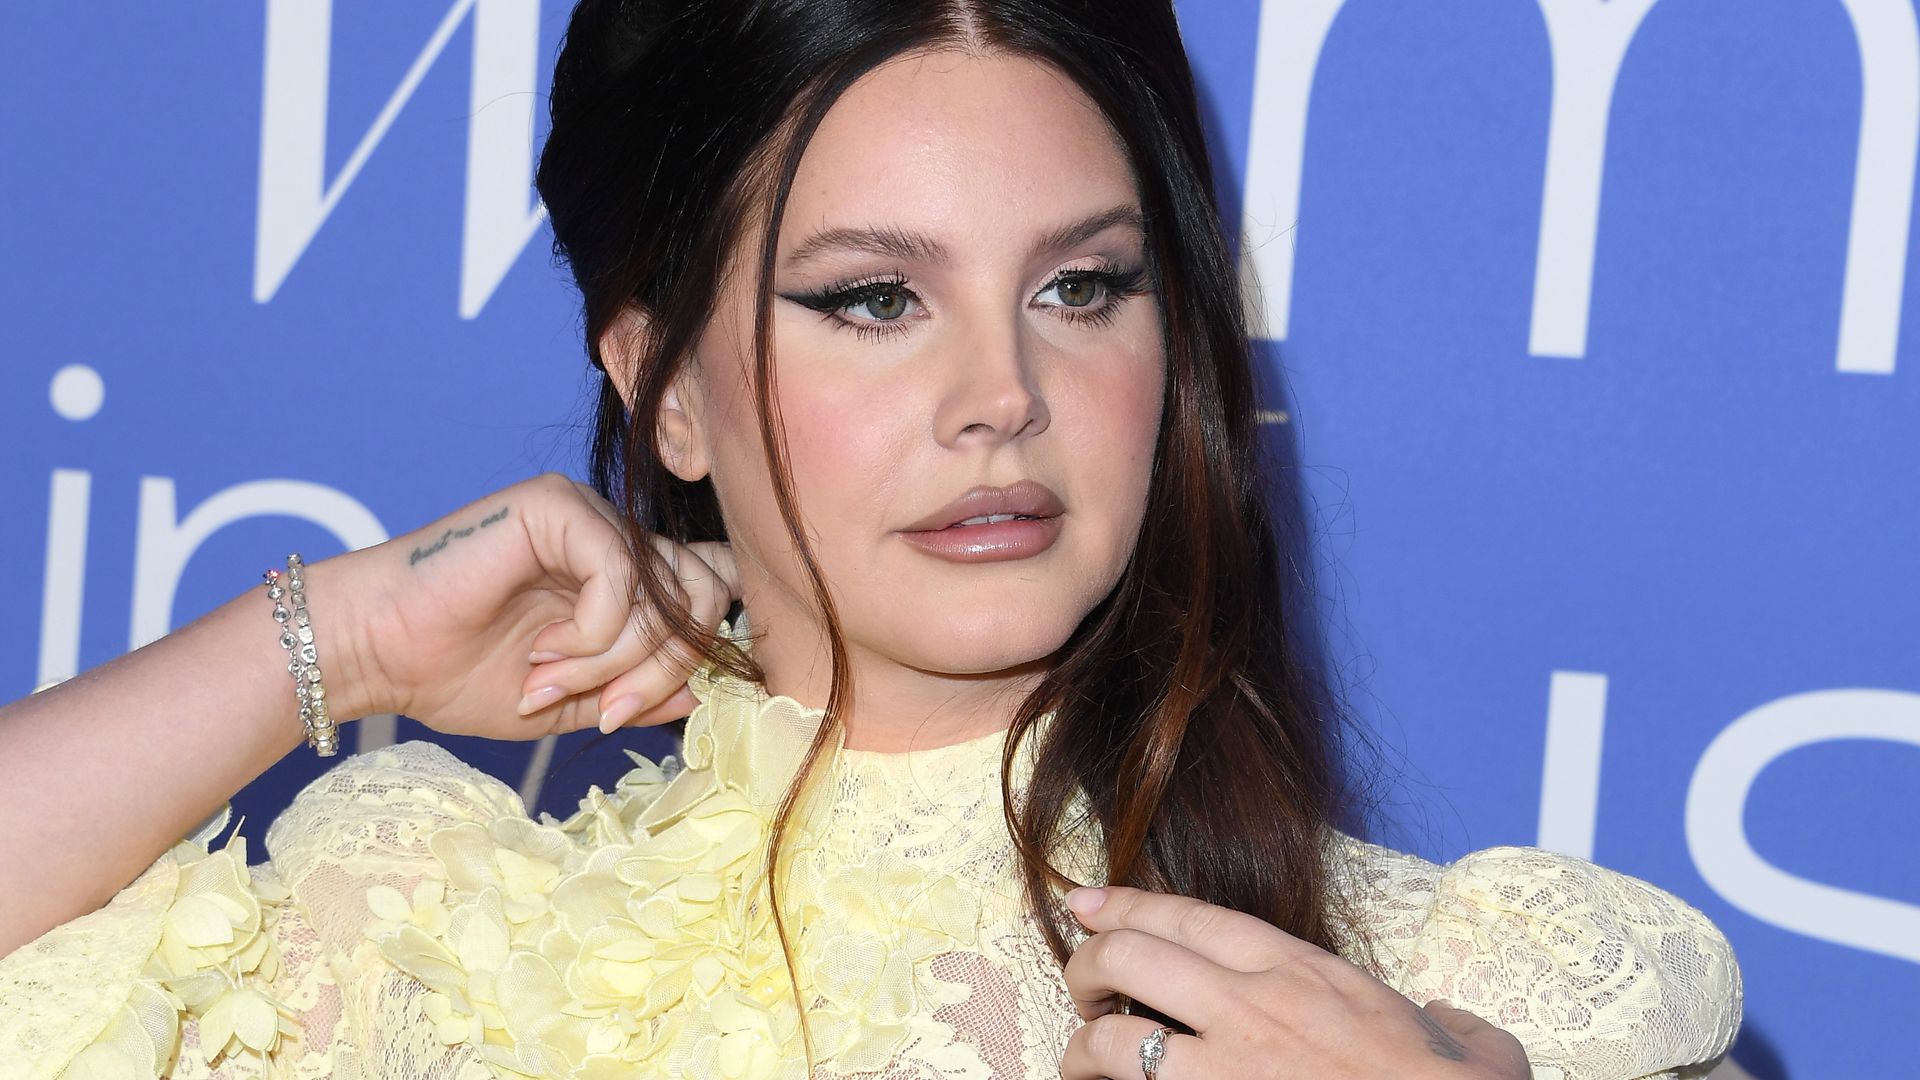 Lana is seen wearing her engagement ring 